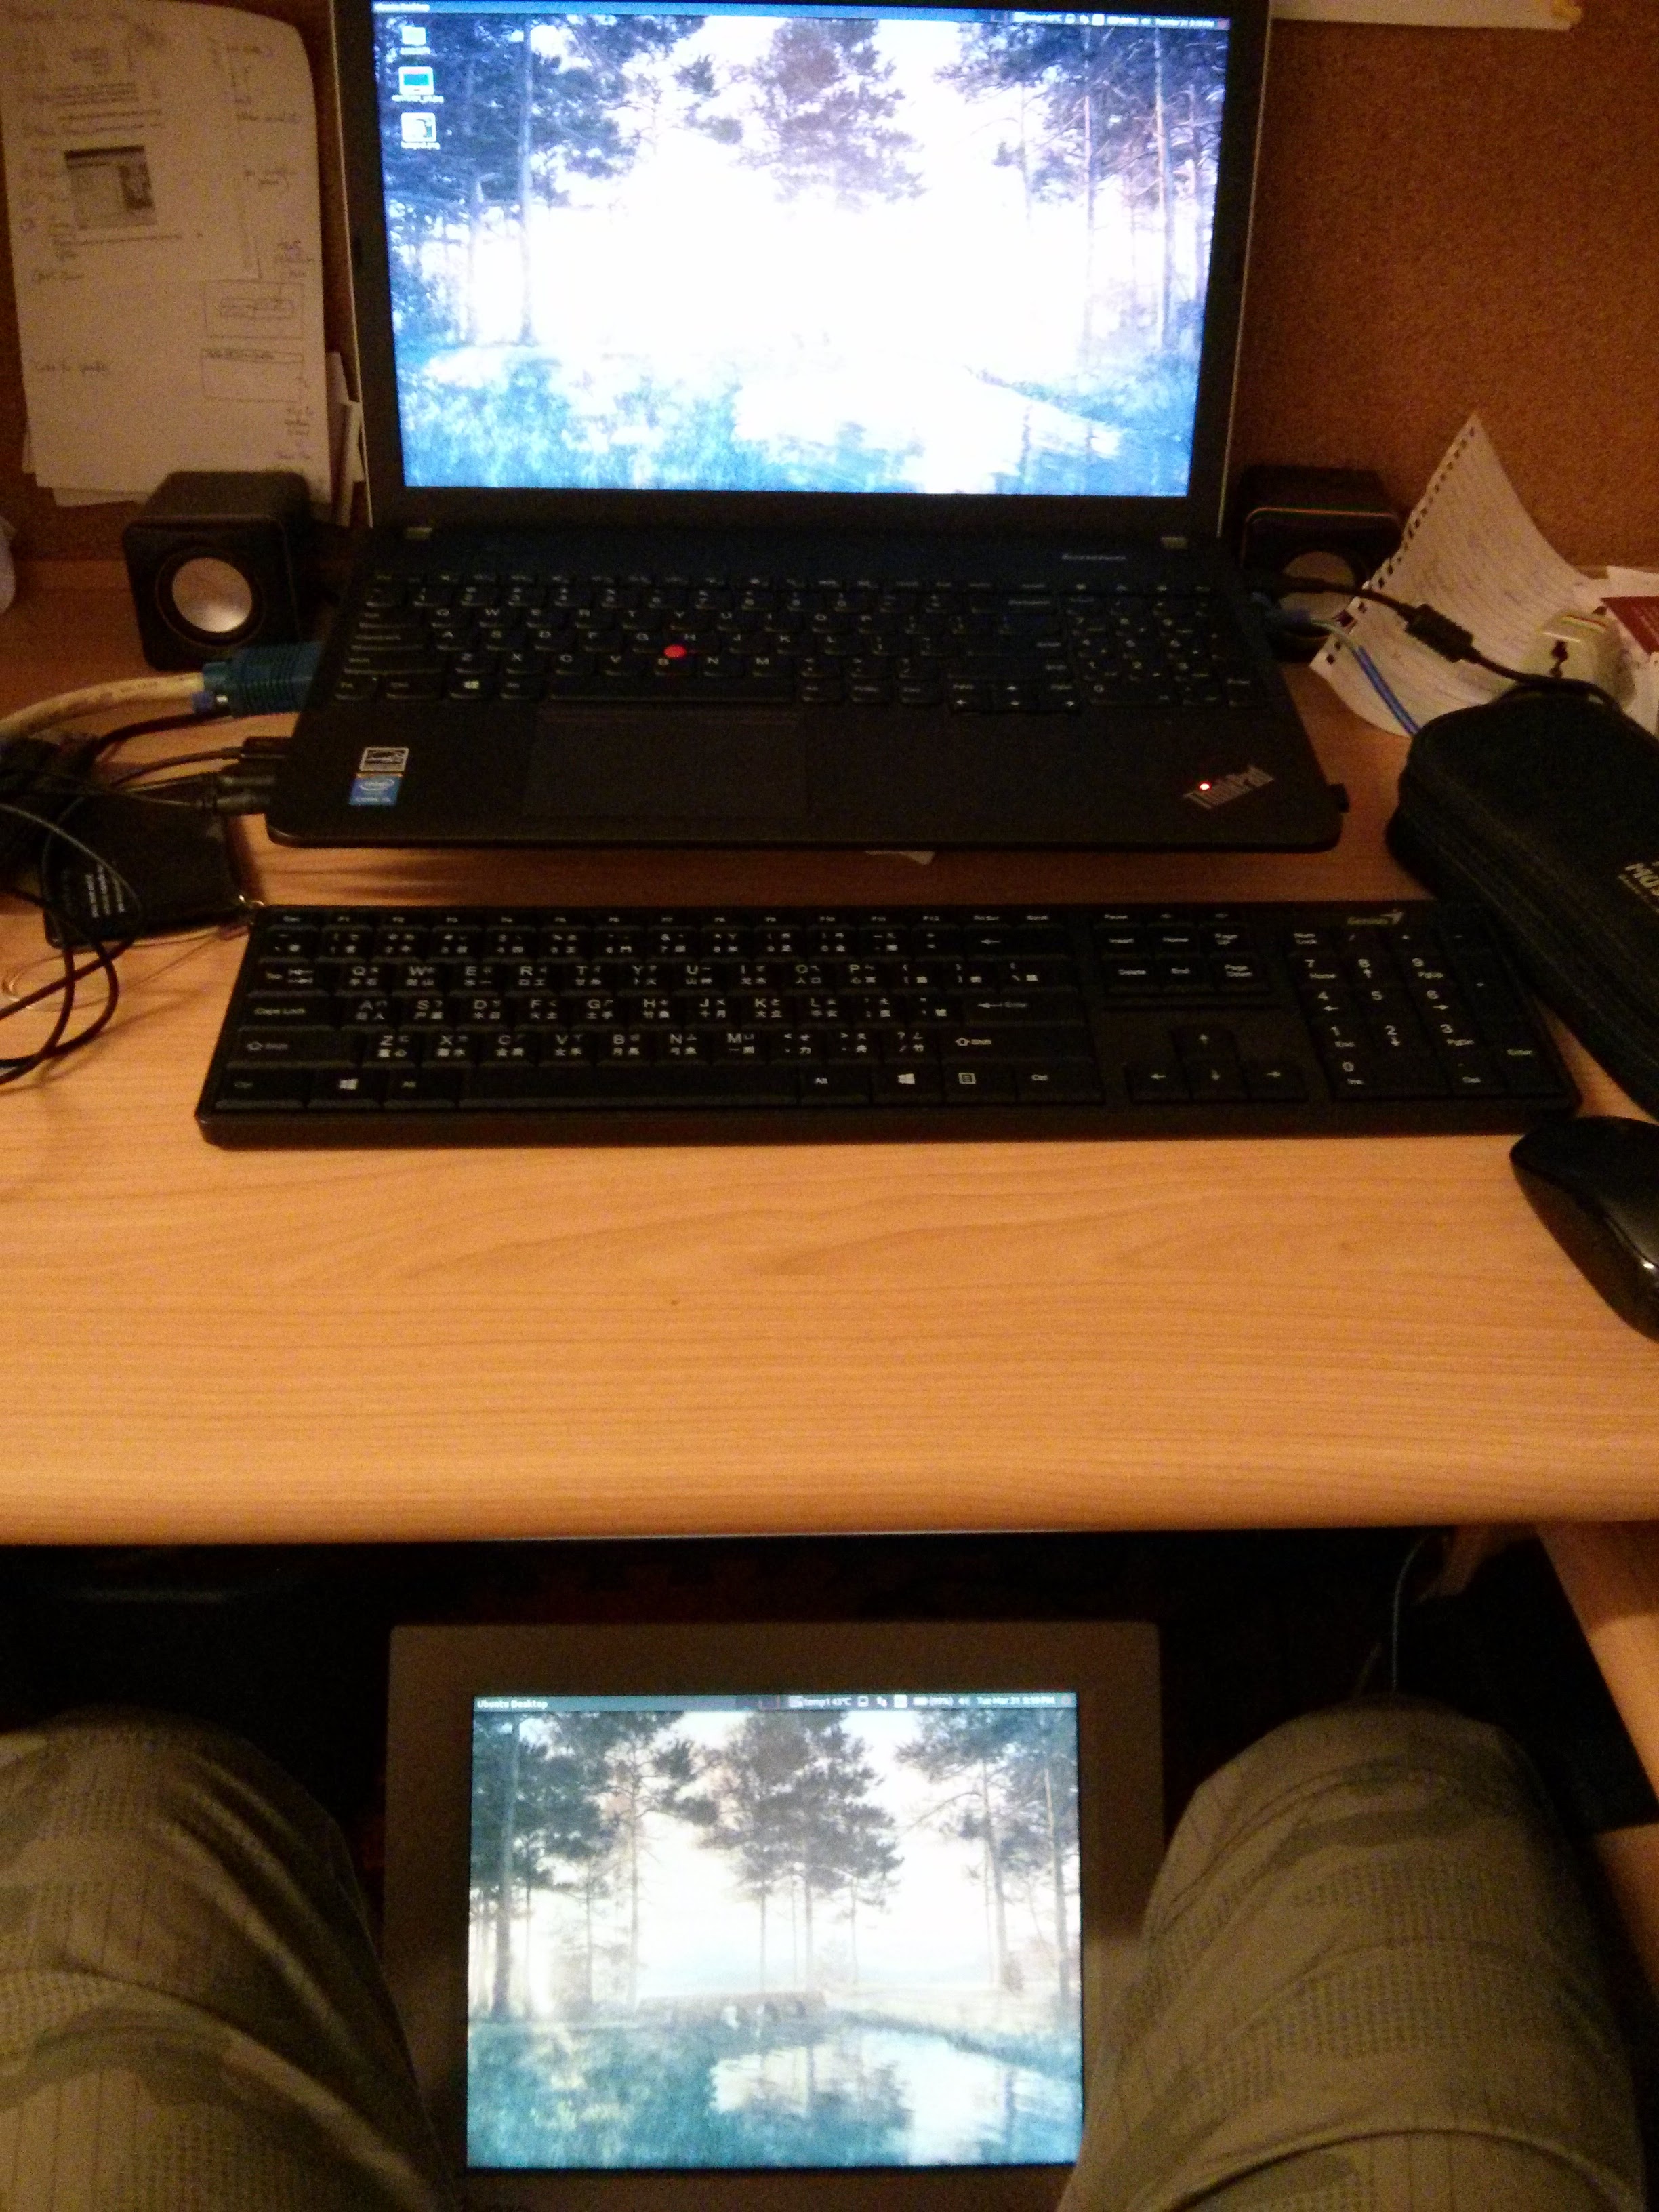 My desk in student hall with a 4:3 old monitor between my legs